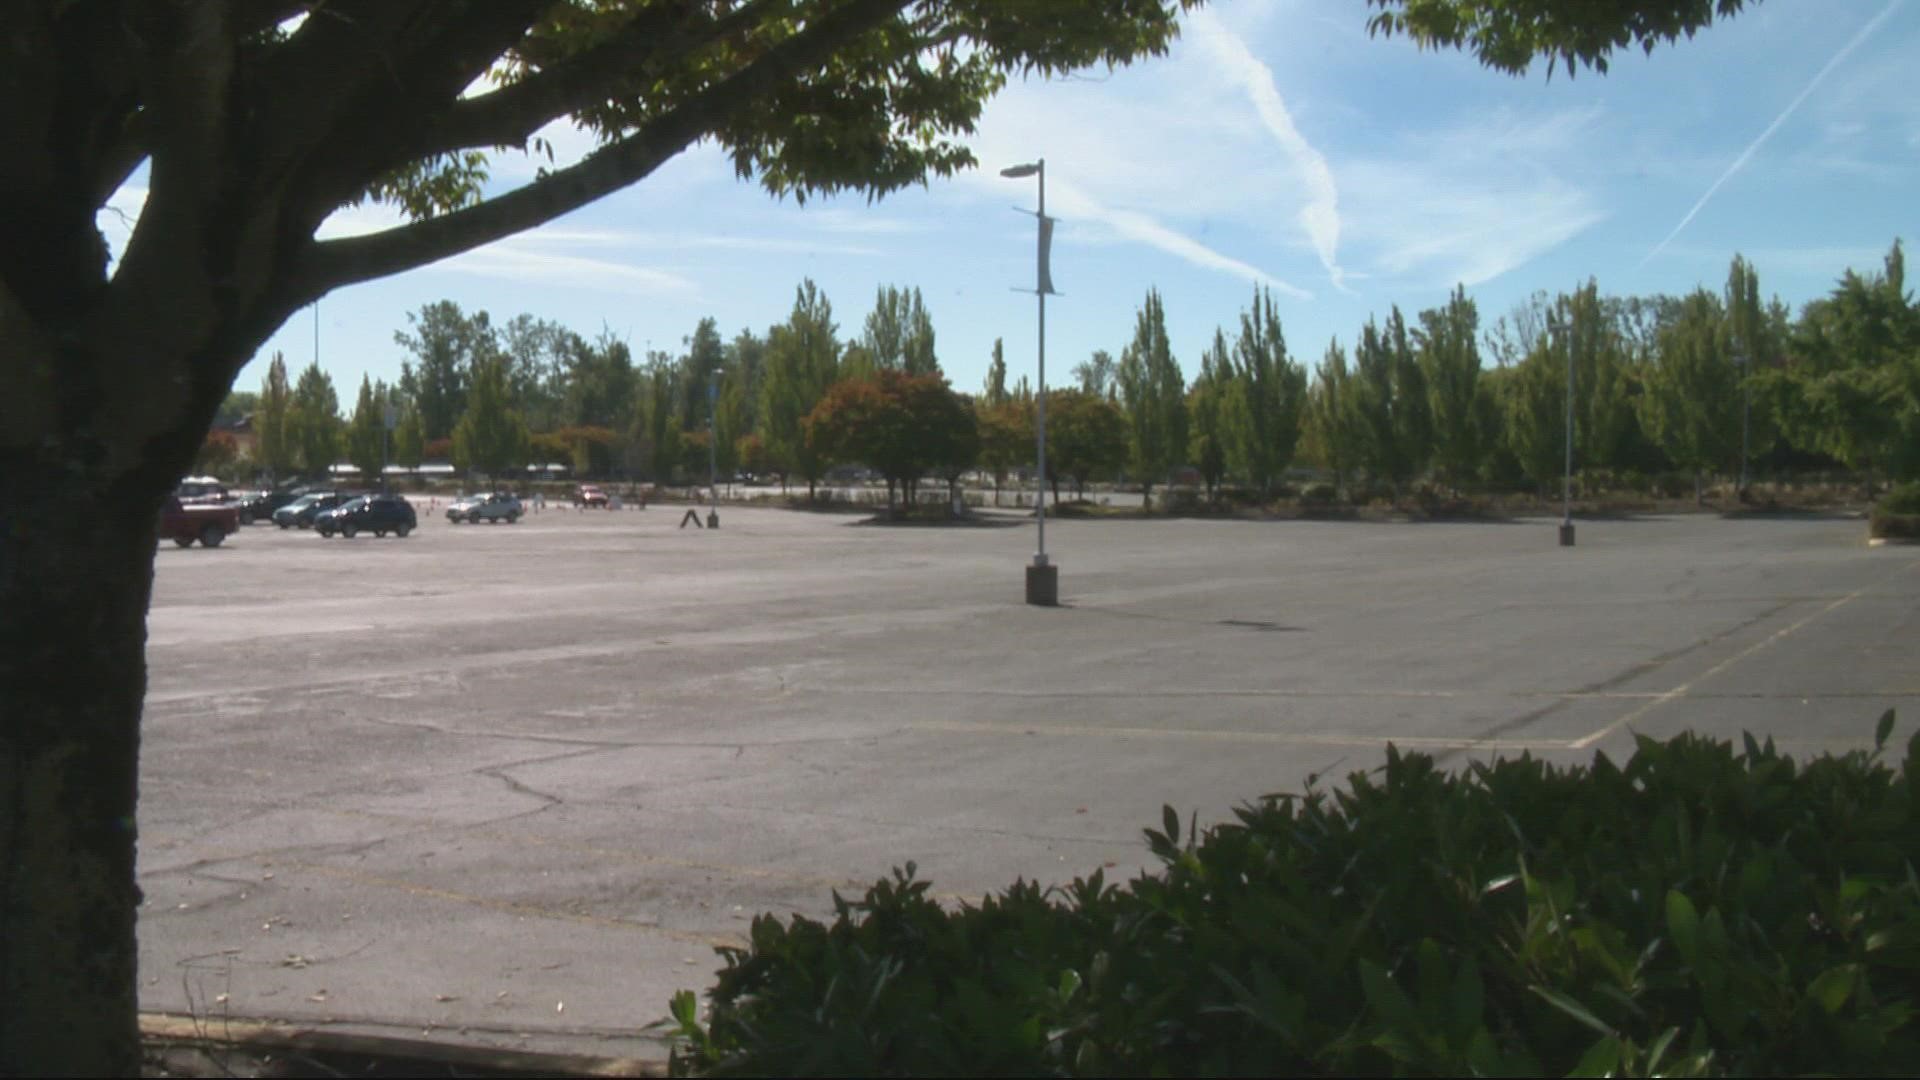 The city of Portland planned to open a space for homeless people to park cars and RVs. But the space they were offered is unacceptable.